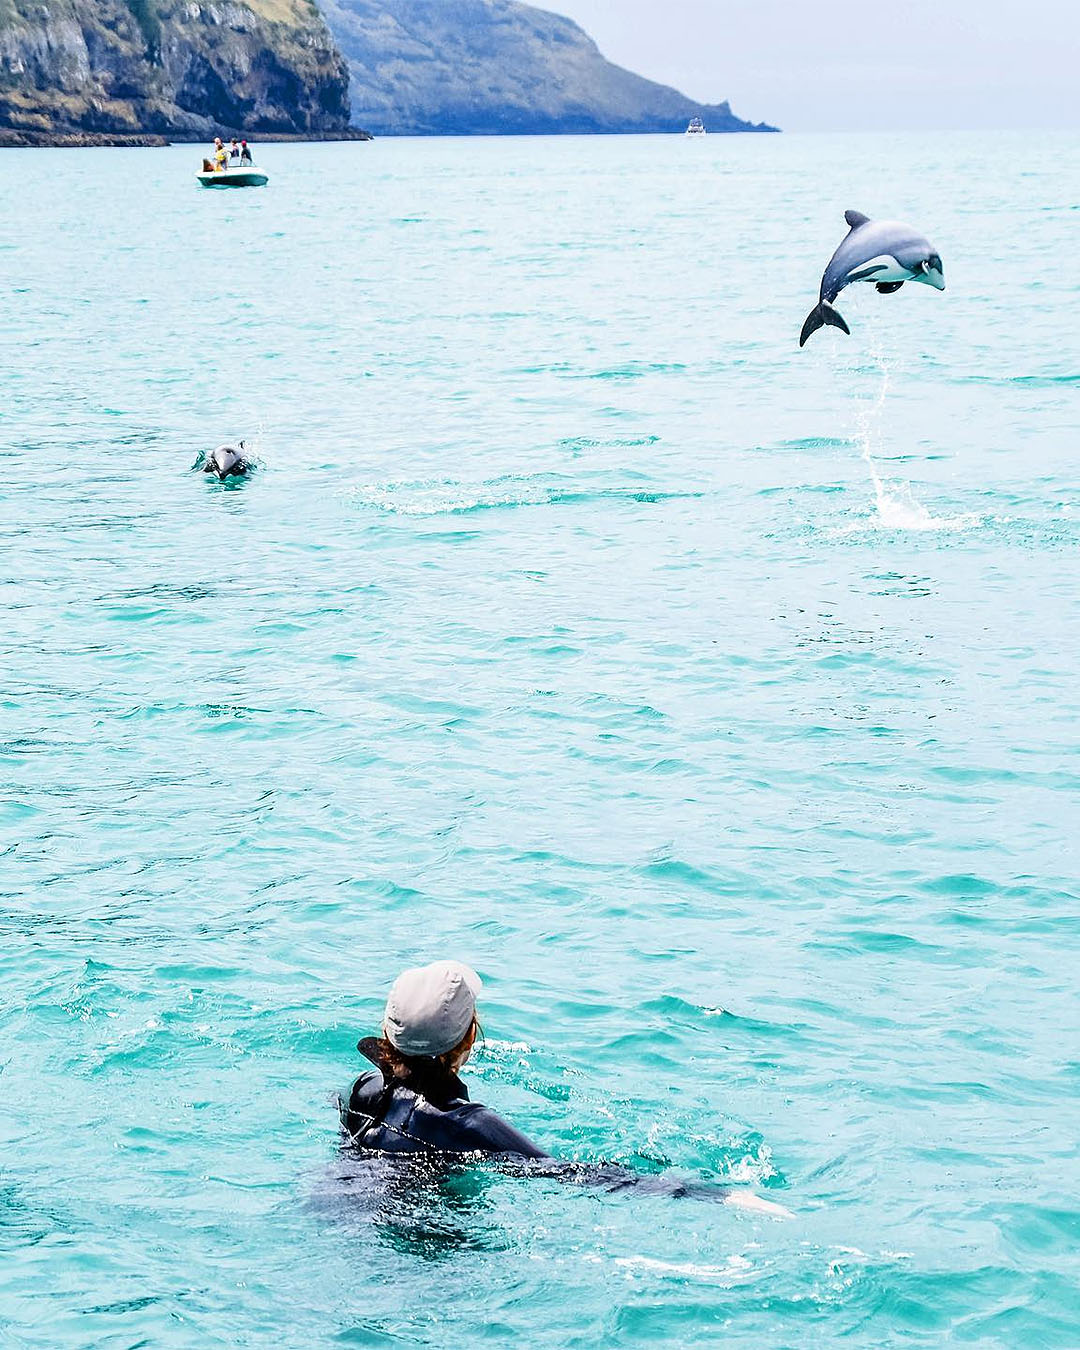 A person watches from the water while dolphins frolic nearby.